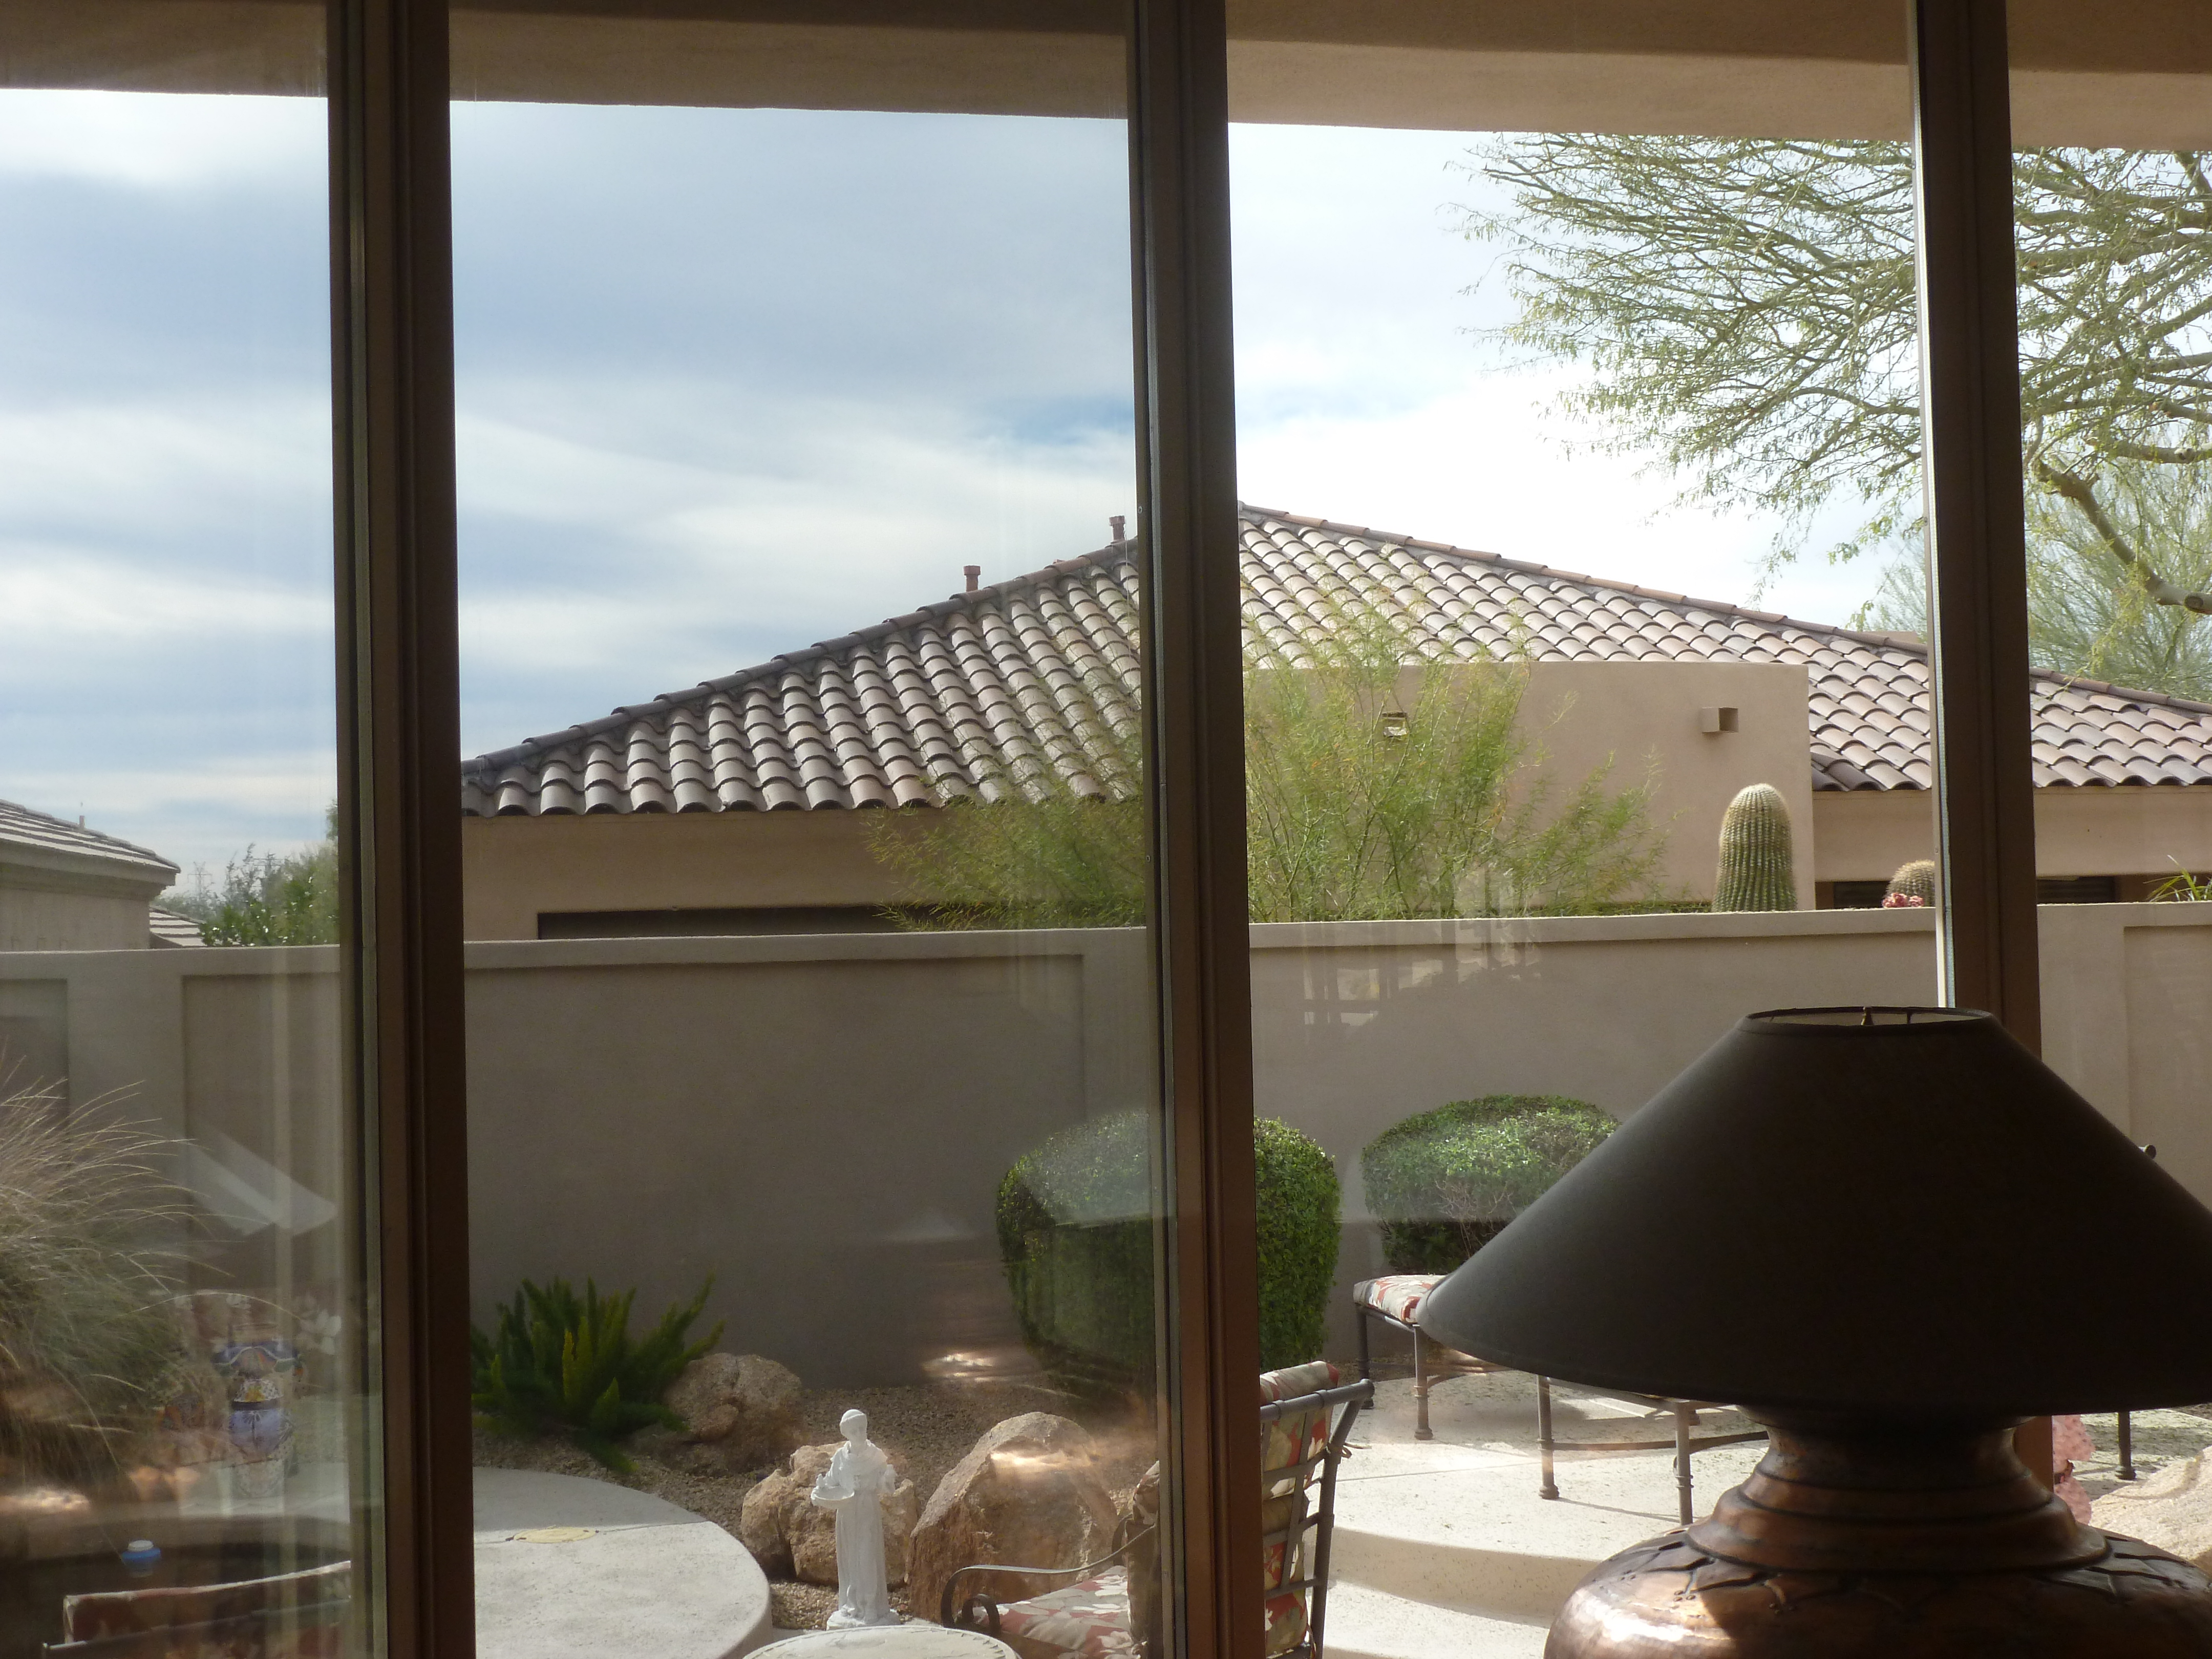 Residential & Commercial Window Tinting - Scottsdale, AZ